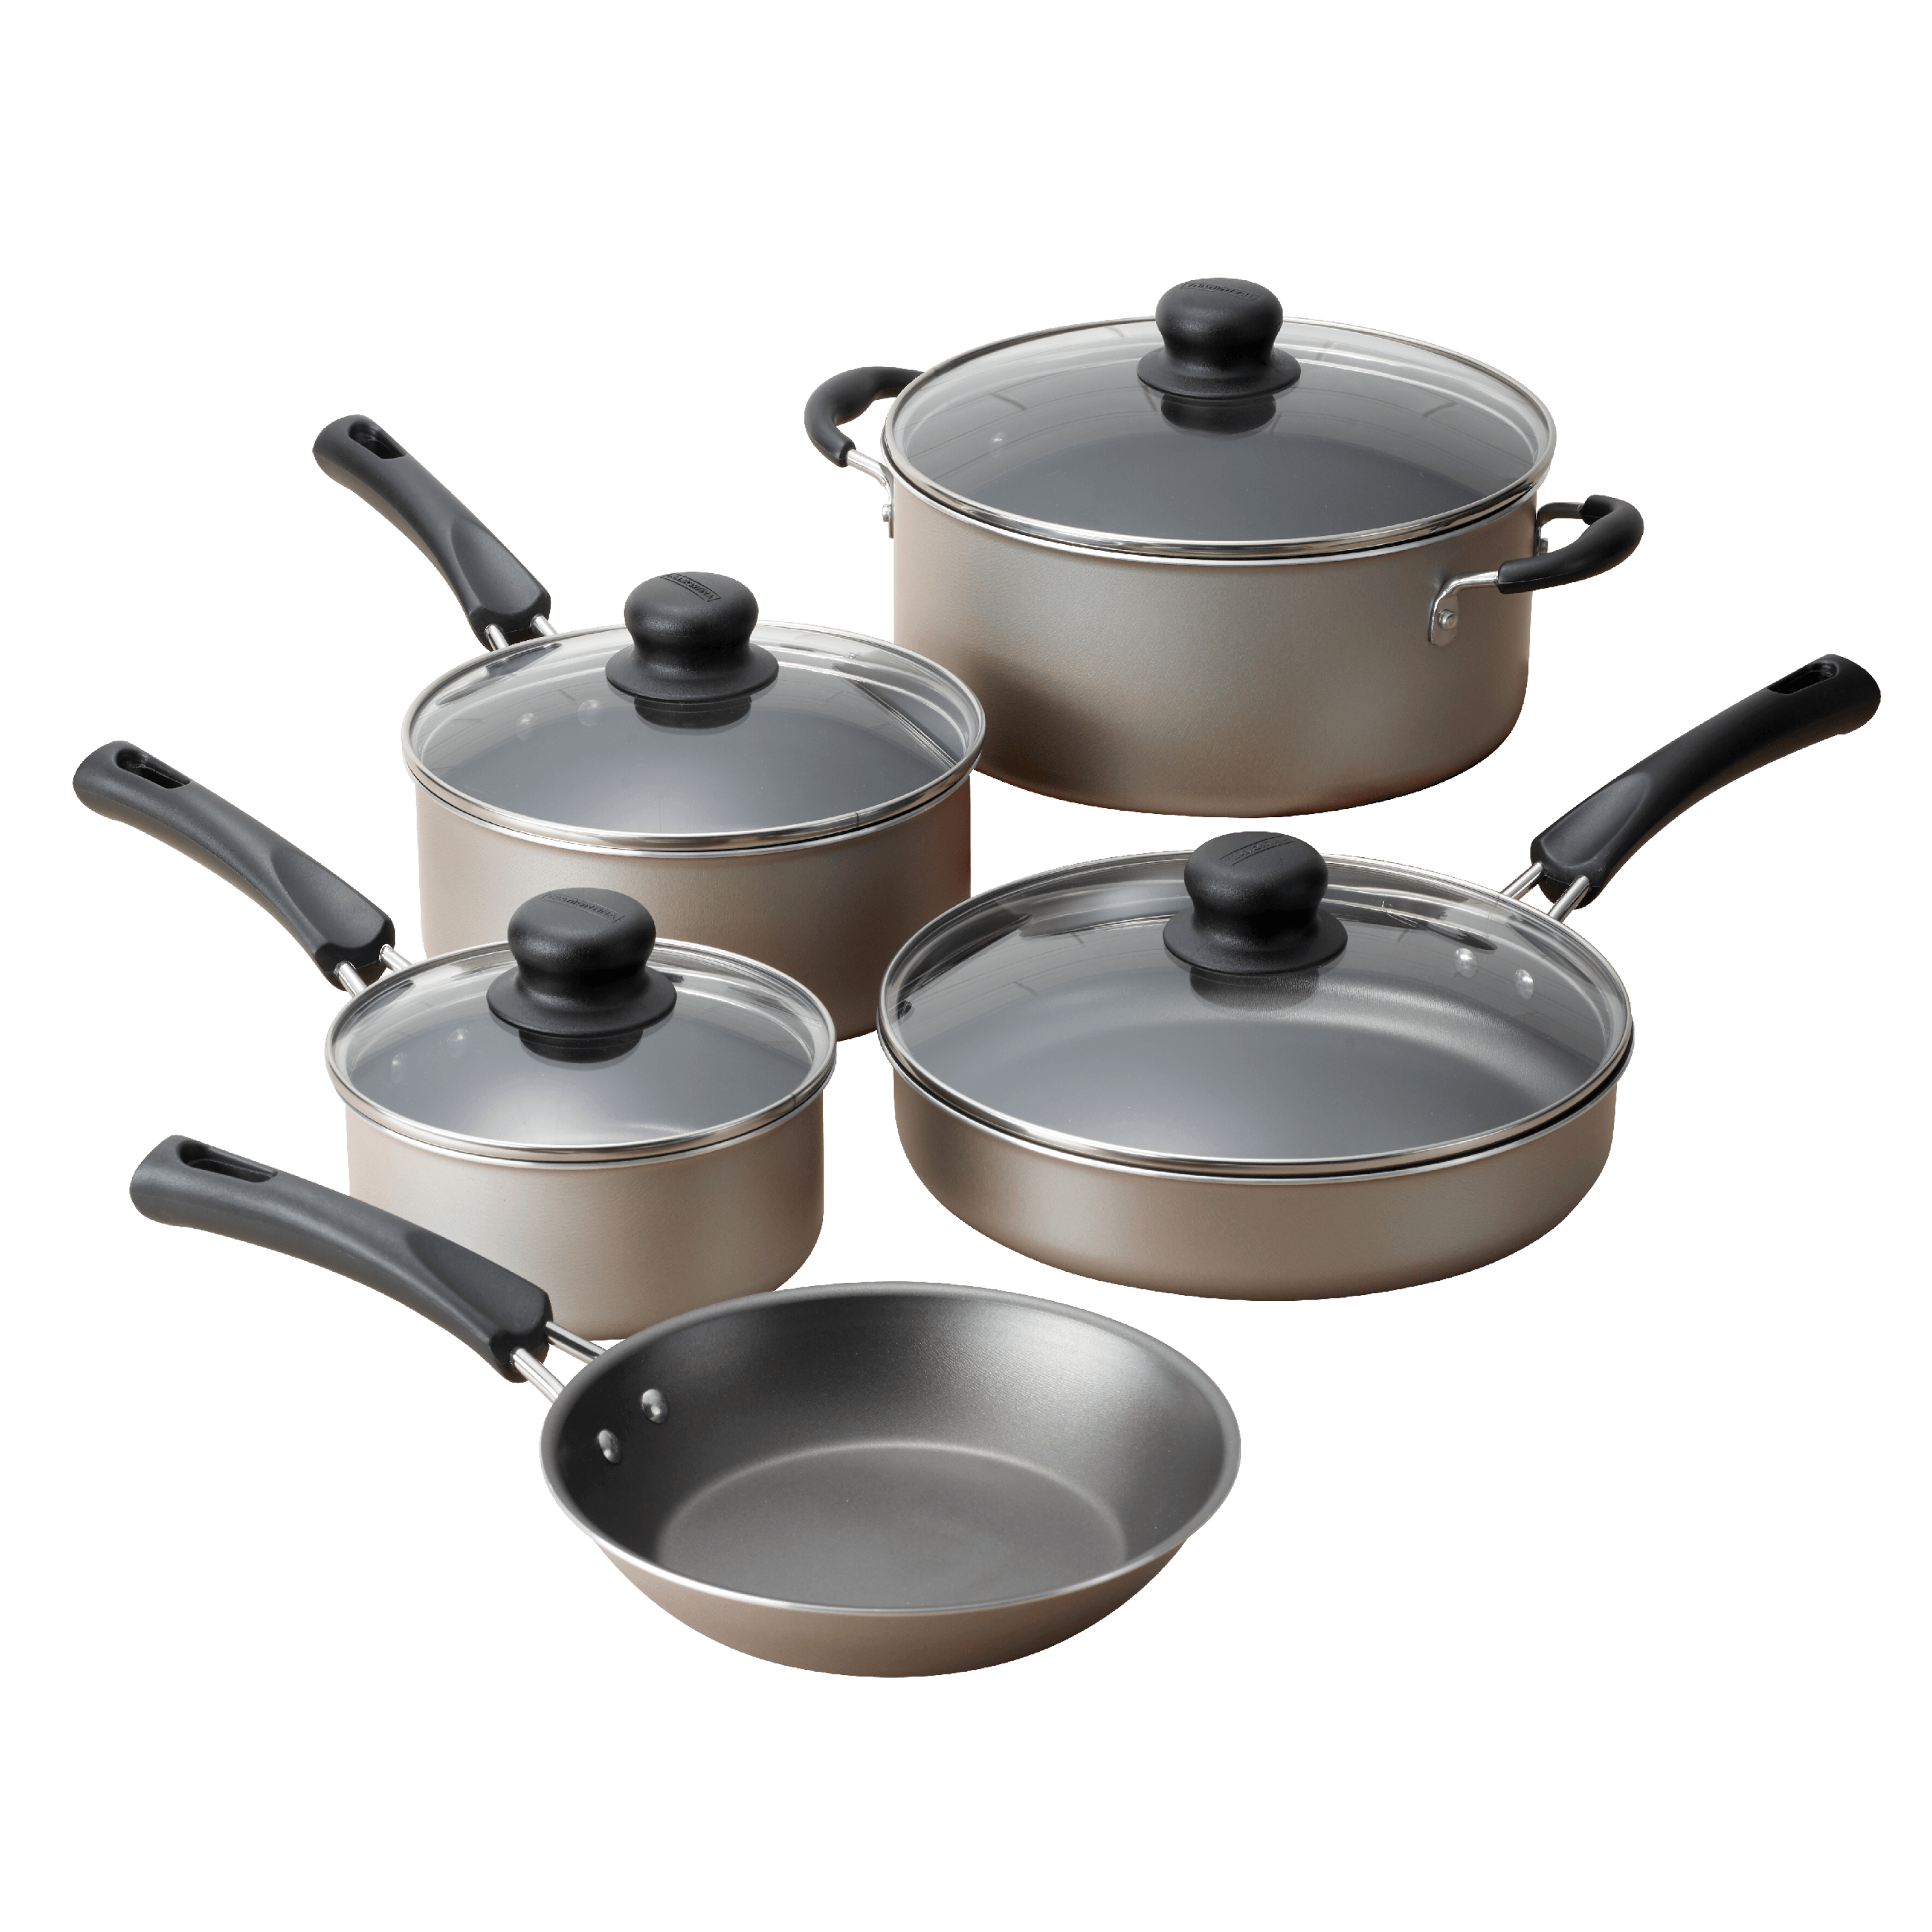 Tramontina tramontina 9 pc induction nonstick cookware set, 80110/029ds